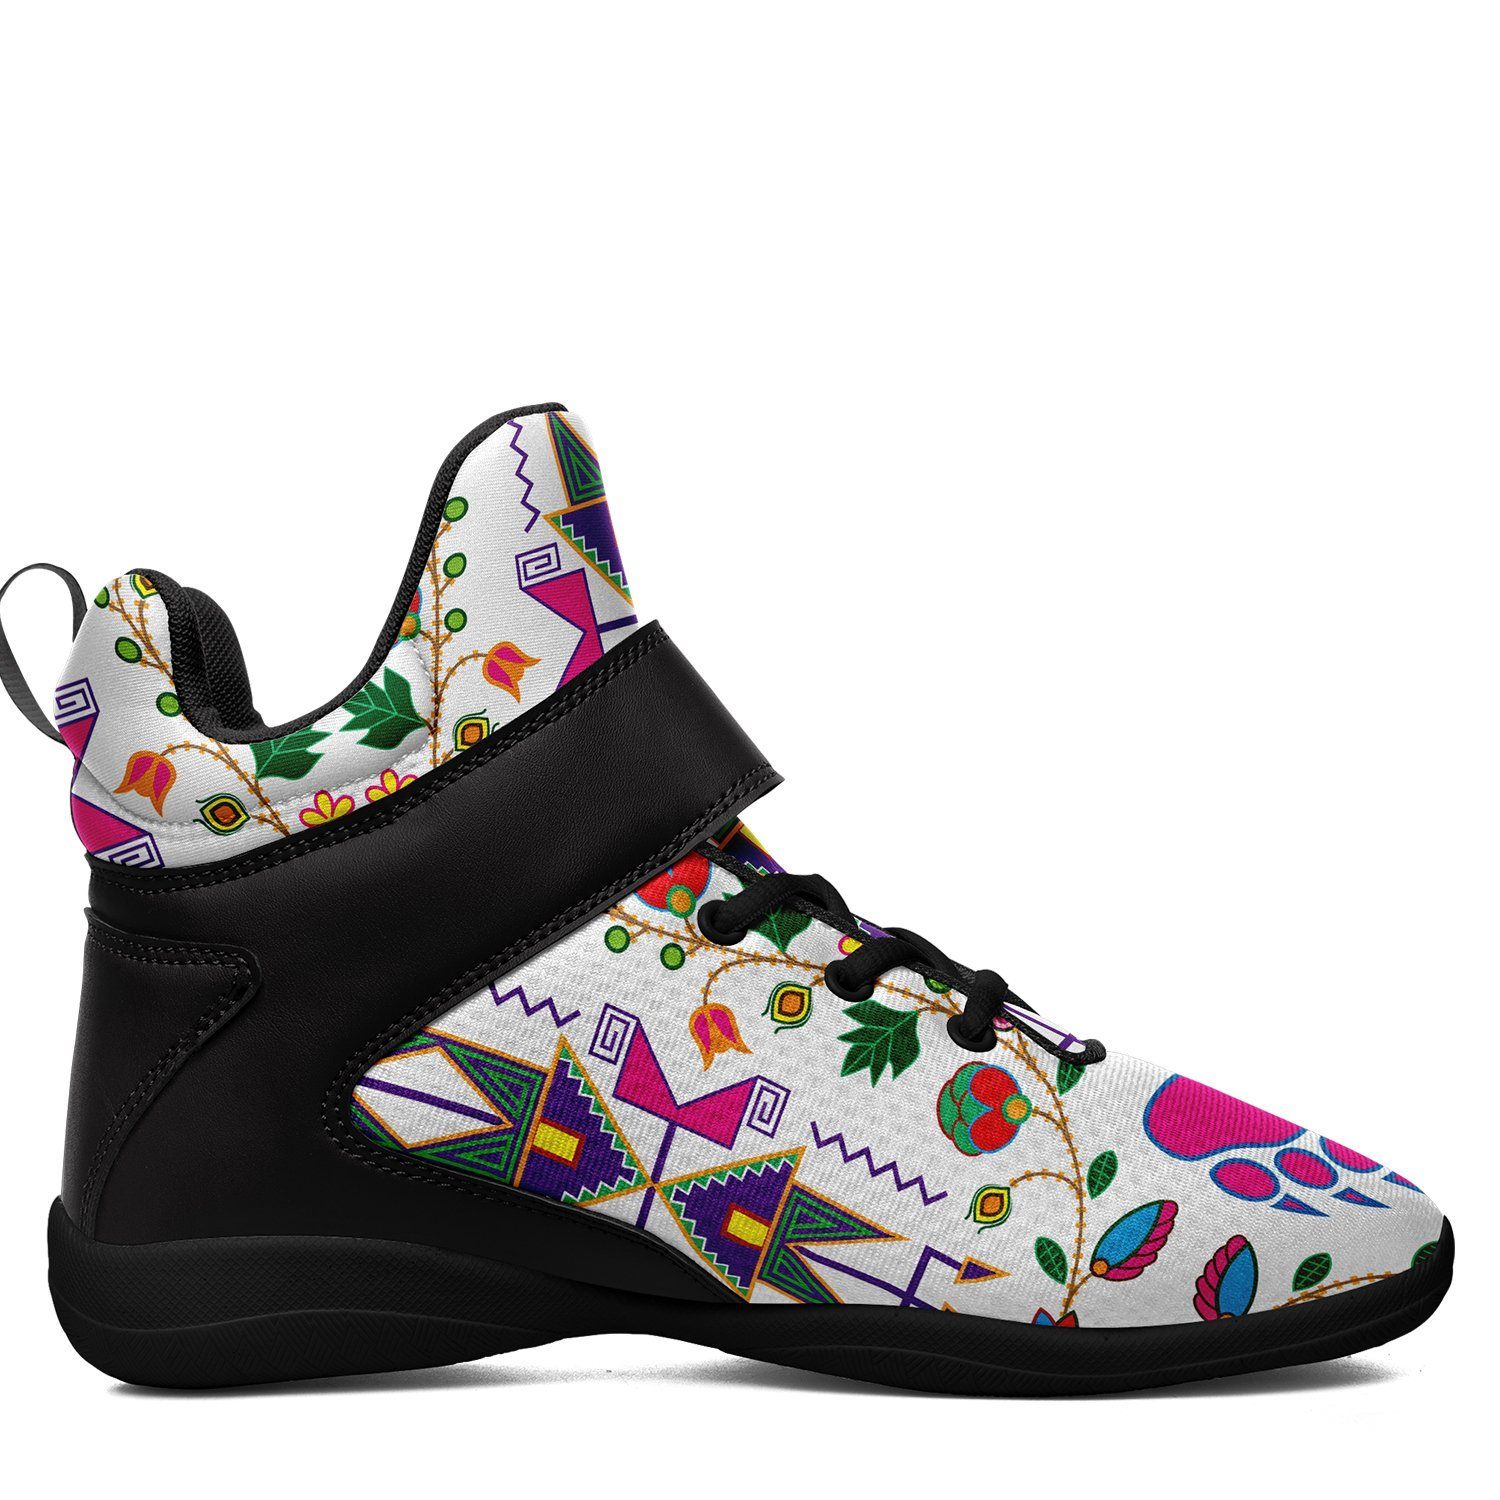 Geometric Floral Fall White Ipottaa Basketball / Sport High Top Shoes - Black Sole 49 Dzine 